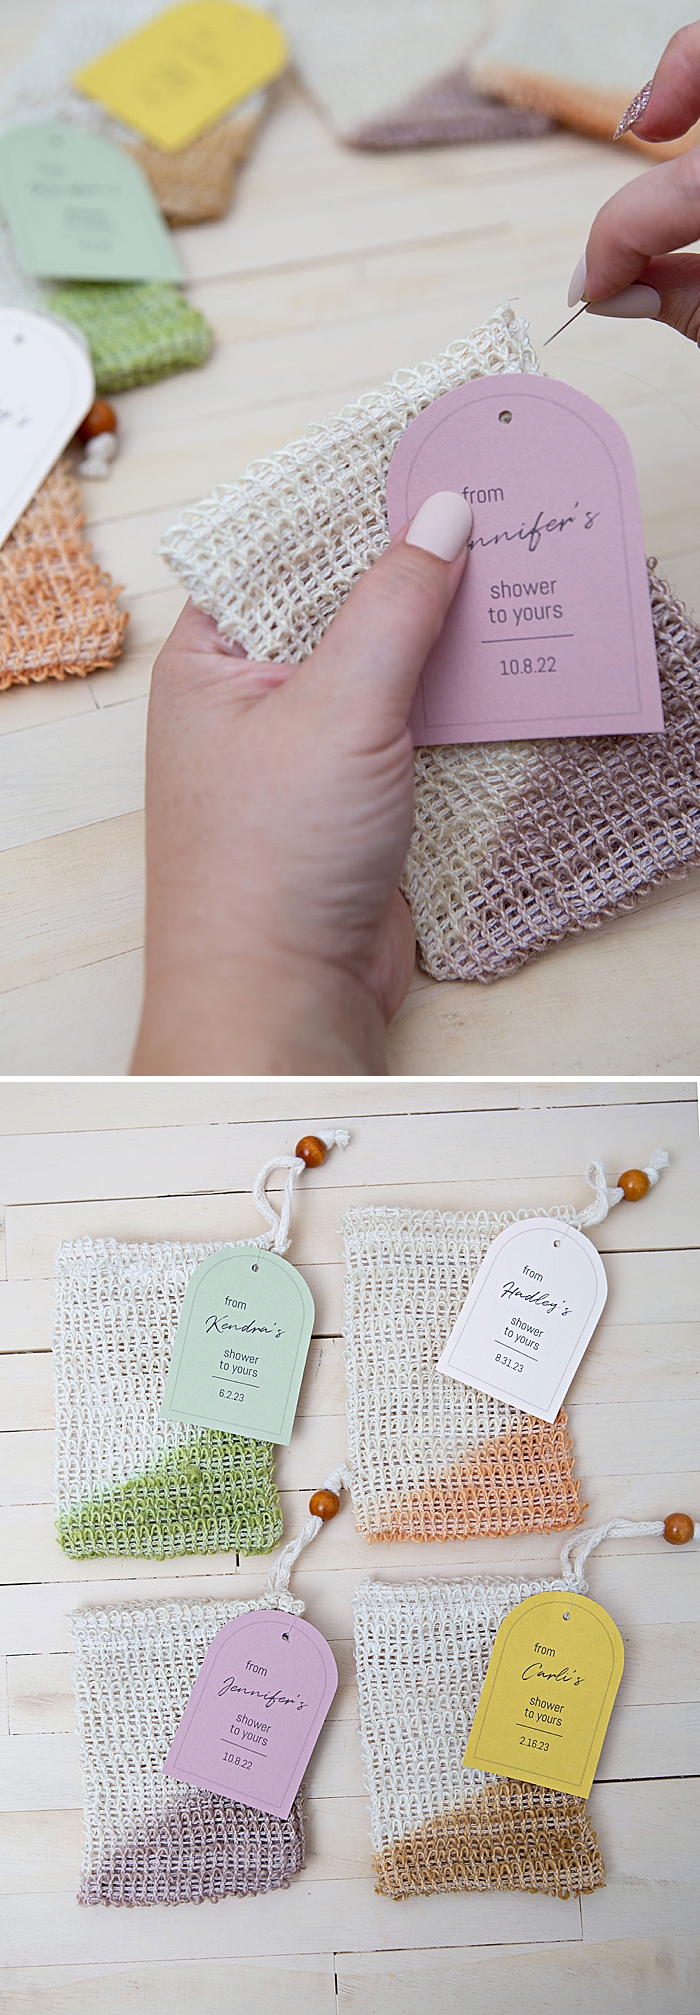 How to hand dye sisal soap savors for favors!